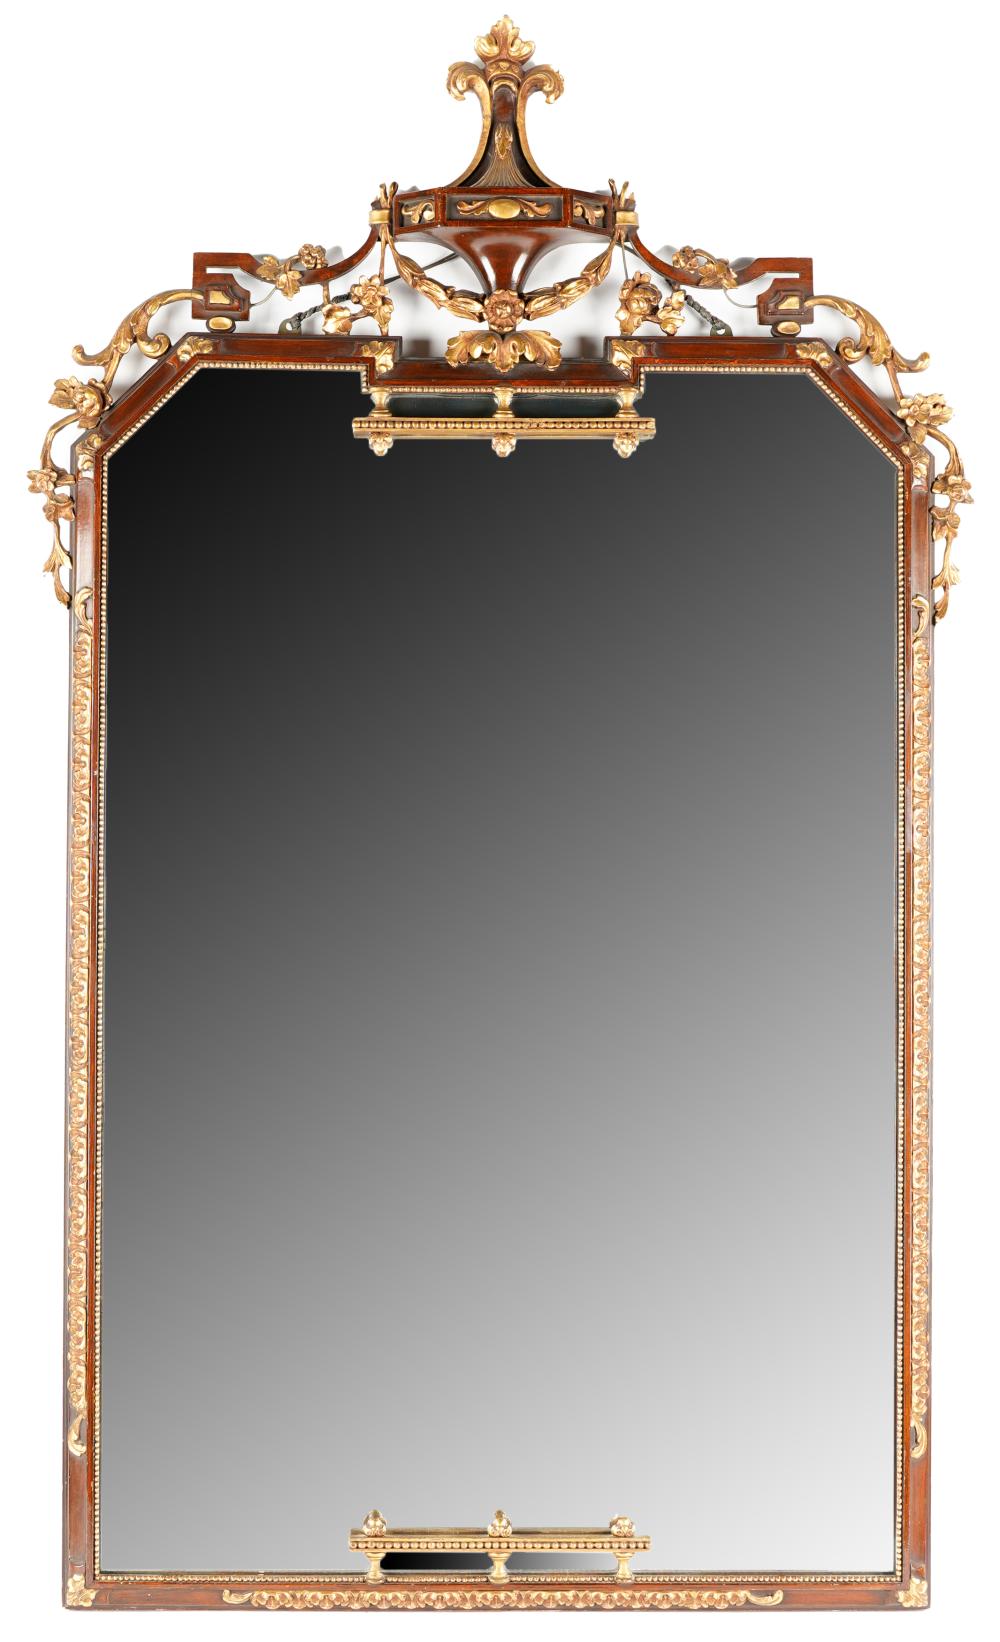 NEOCLASSICAL-STYLE WALL MIRROR20th